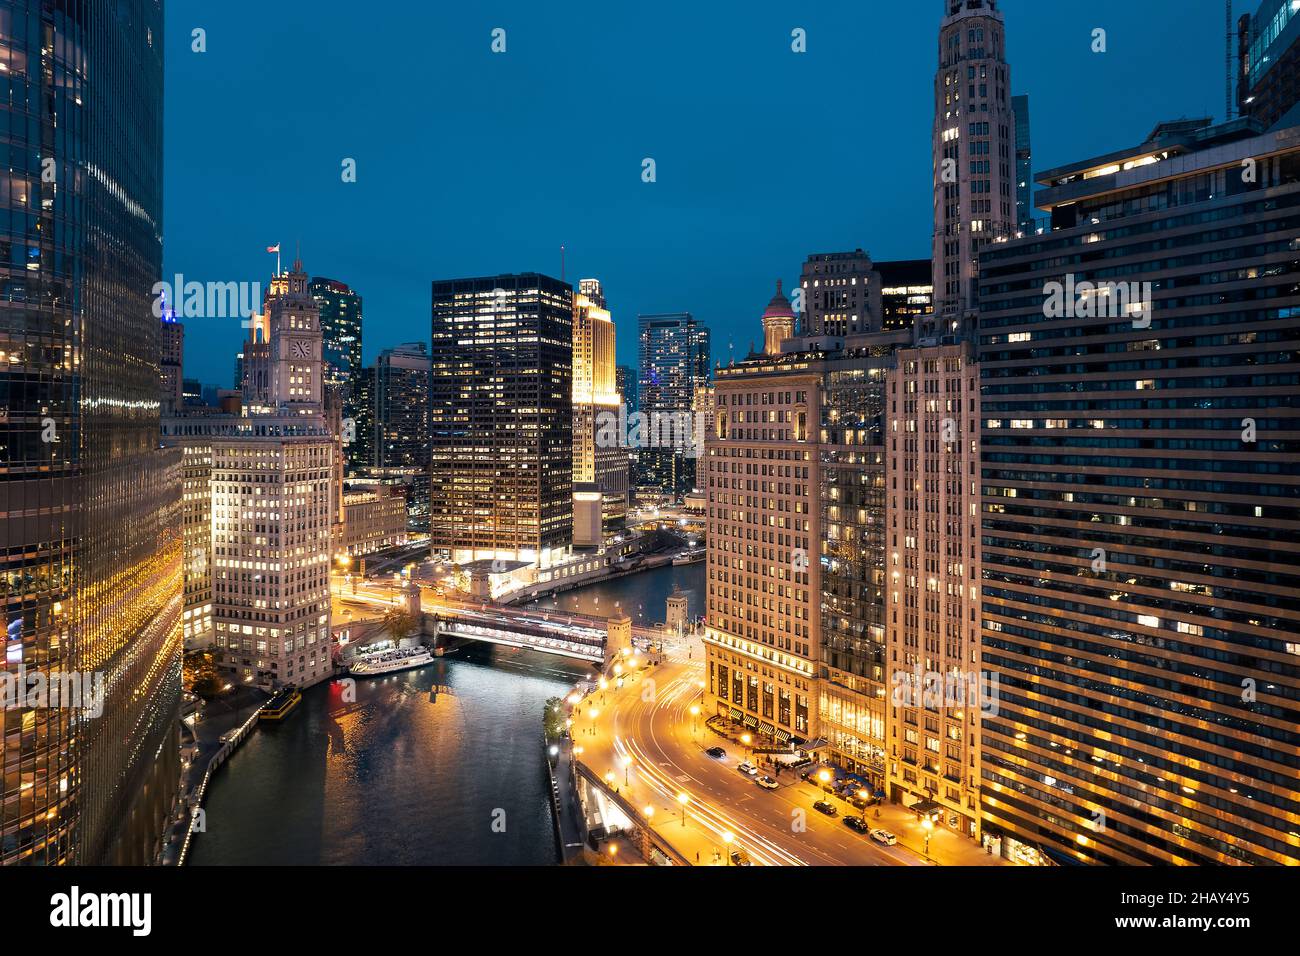 Downtown cityscape and Chicago river at night, Chicago, Illinois, USA Stock Photo